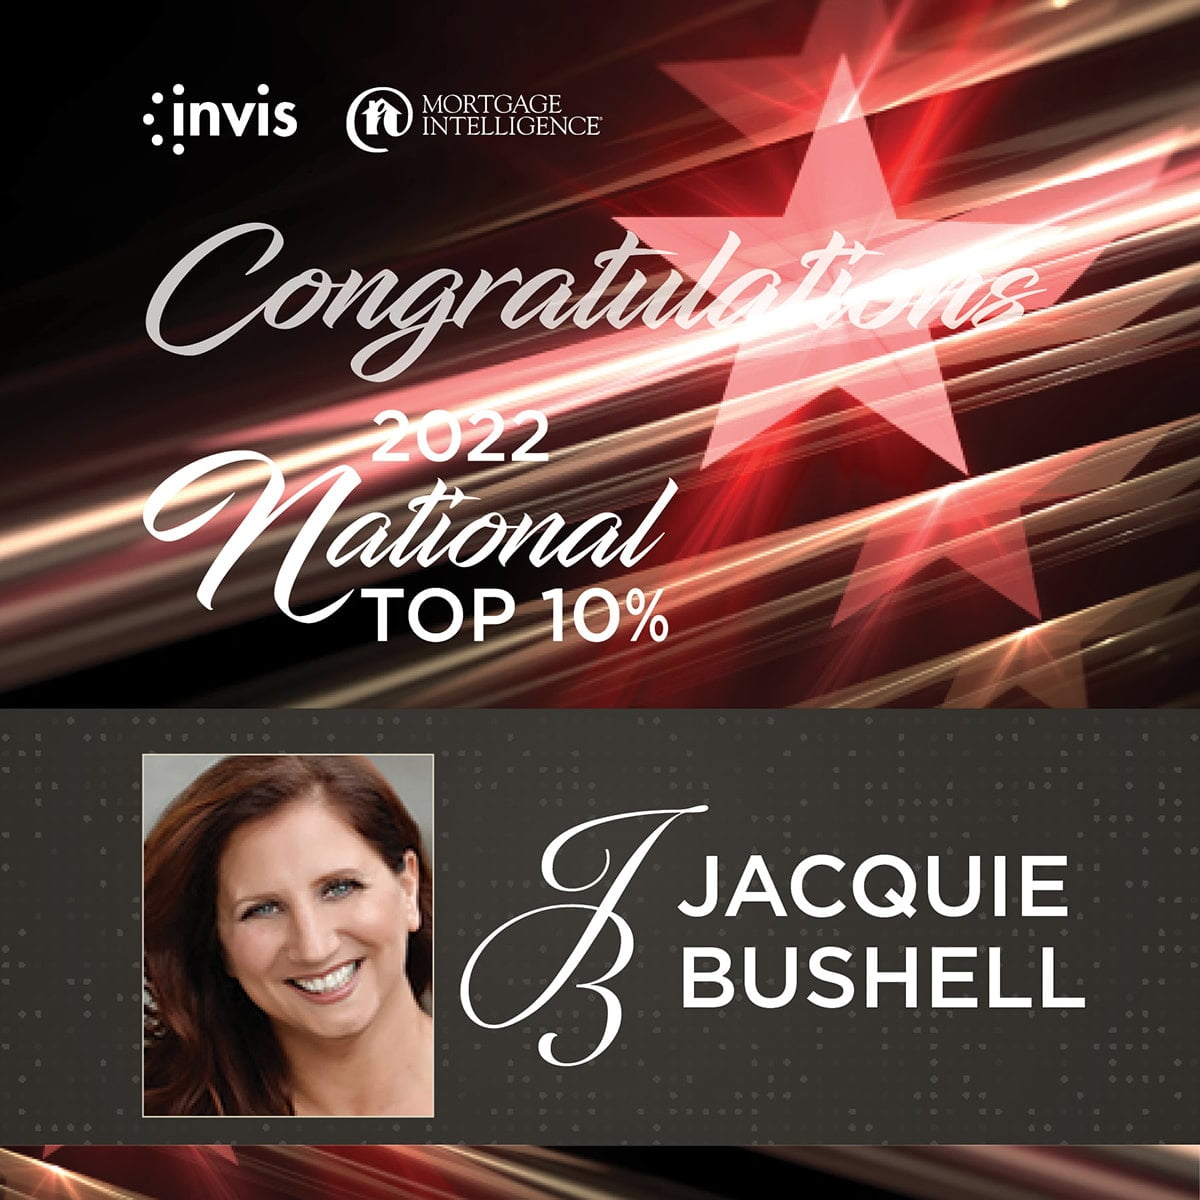 Jacquie Bushell, Top 5% of Mortgage Brokers